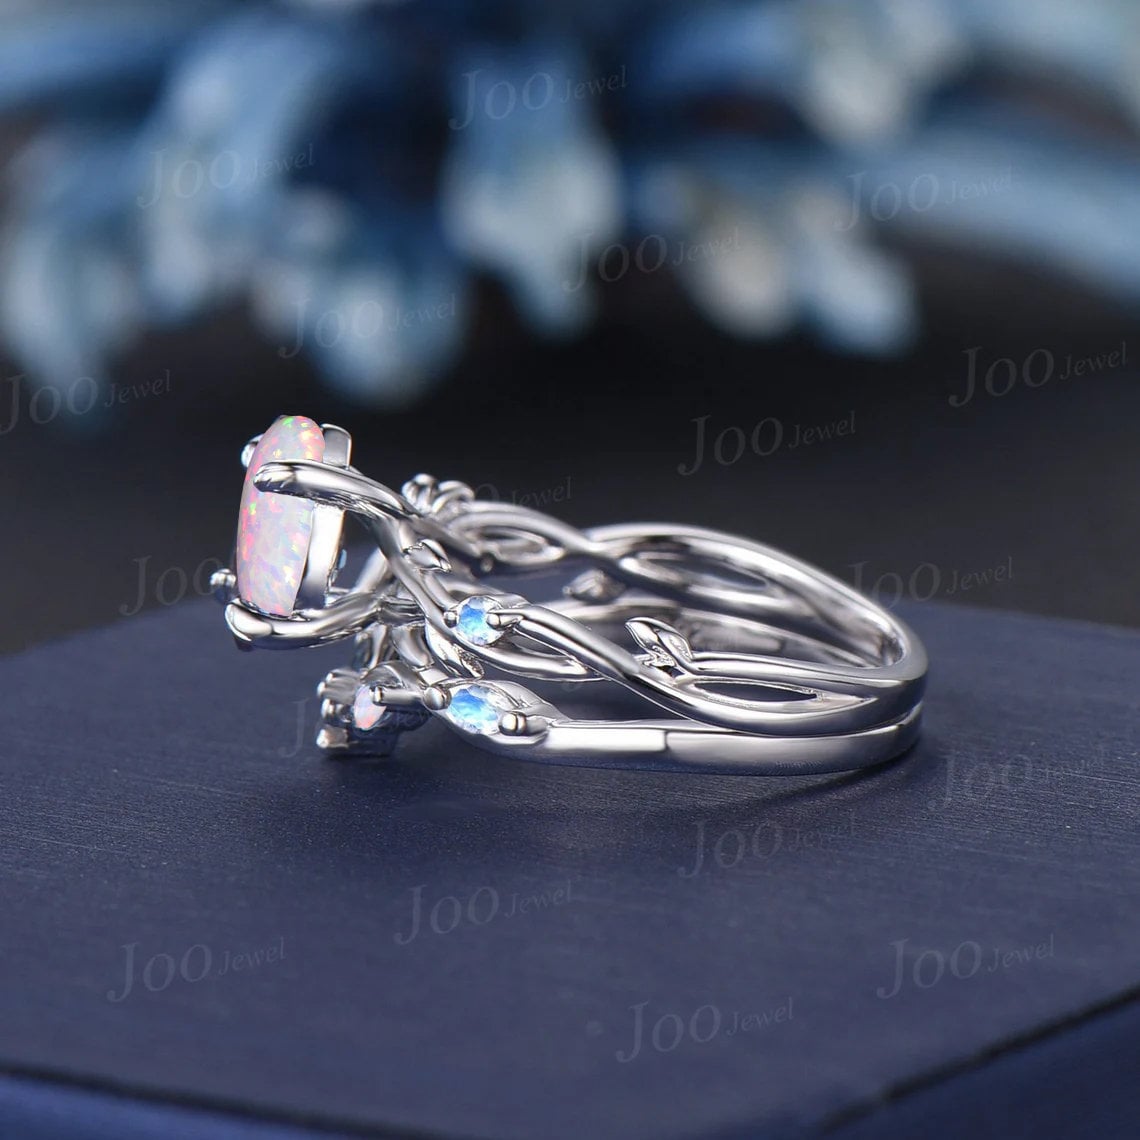 1.25ct Nature Inspired Pear Shaped White Opal Moonstone Bridal Set Unique 14k White Gold Twig Vine Teardrop Fire Opal Wedding Proposal Ring